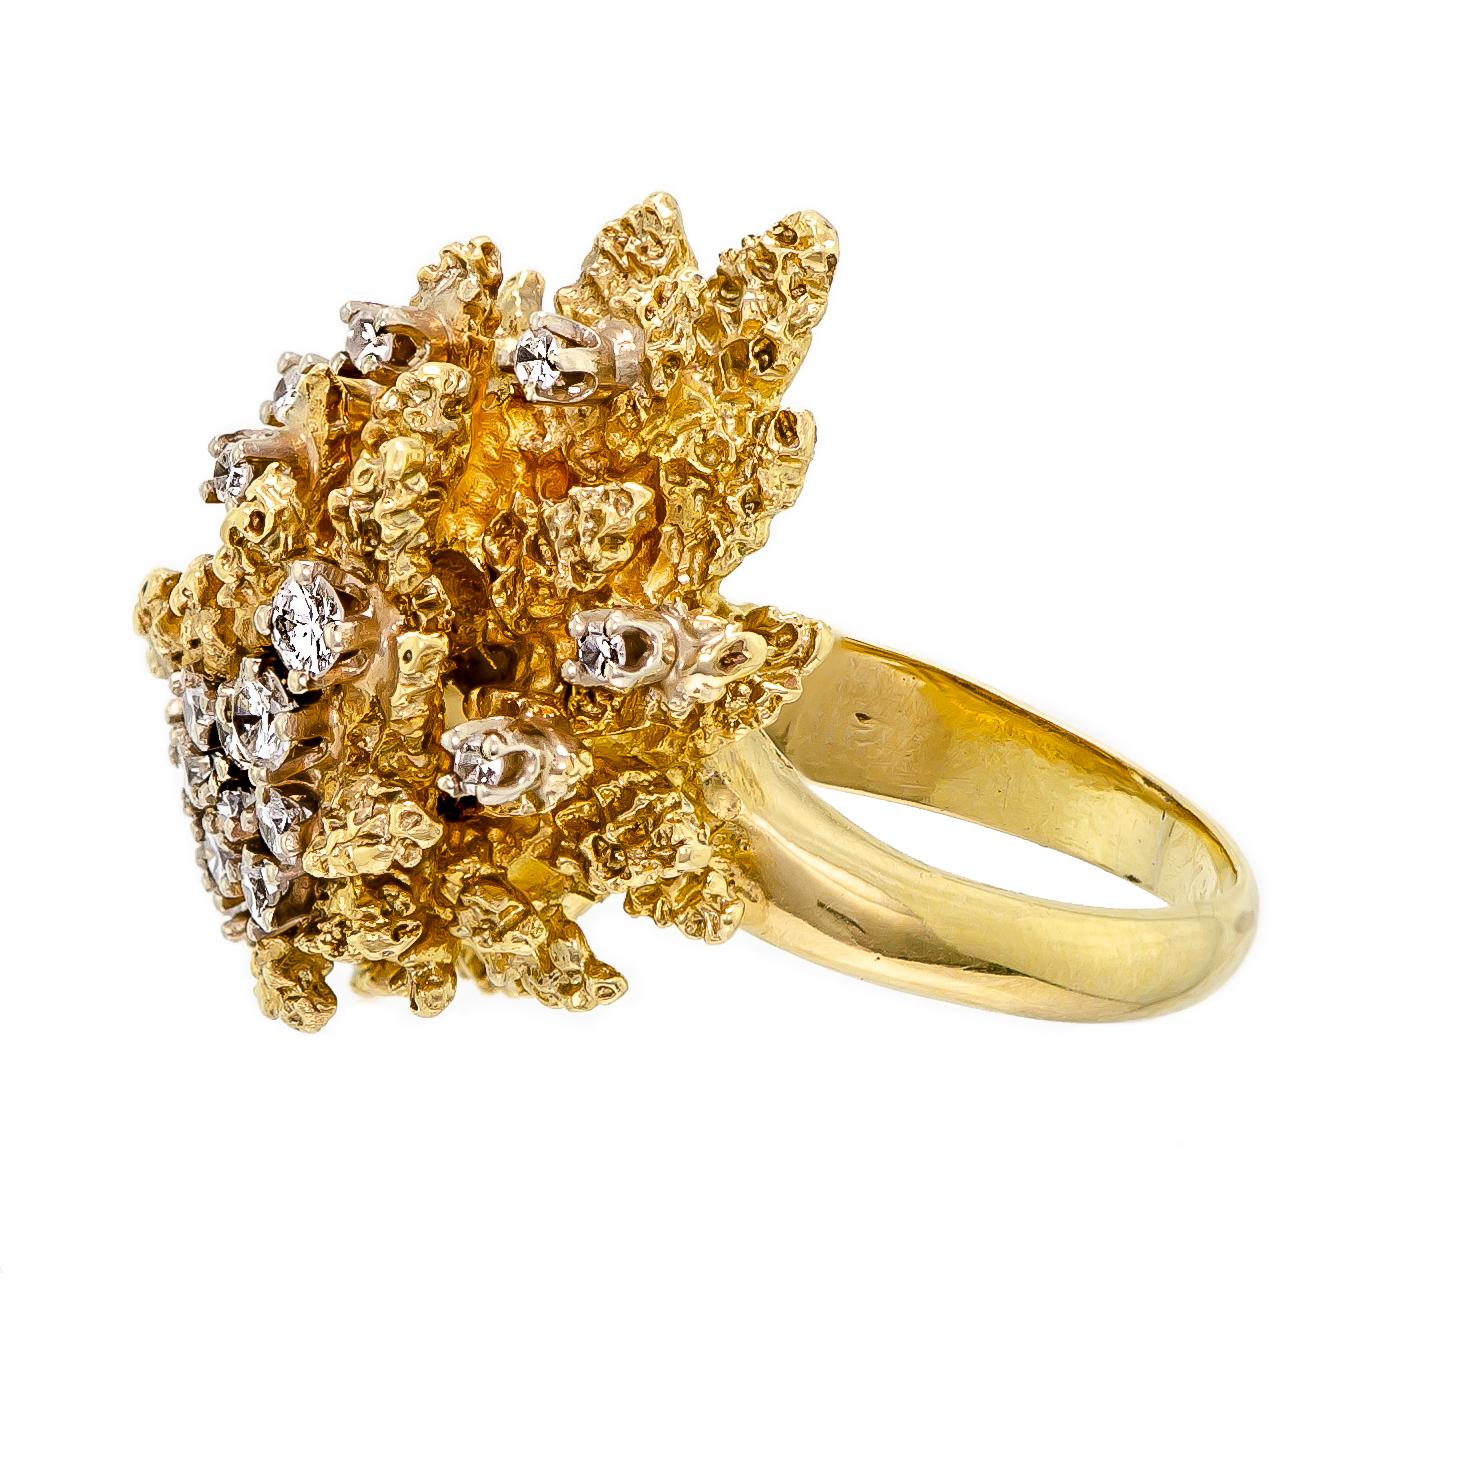 Vintage heavy circa 1960 diamond and 18k yellow gold abstract spray ring. Set with round dazzling brilliant cut diamonds molded into an interesting bark finish gold mount. Hallmark found inside the ring shank 750 quality mark. This cocktail ring